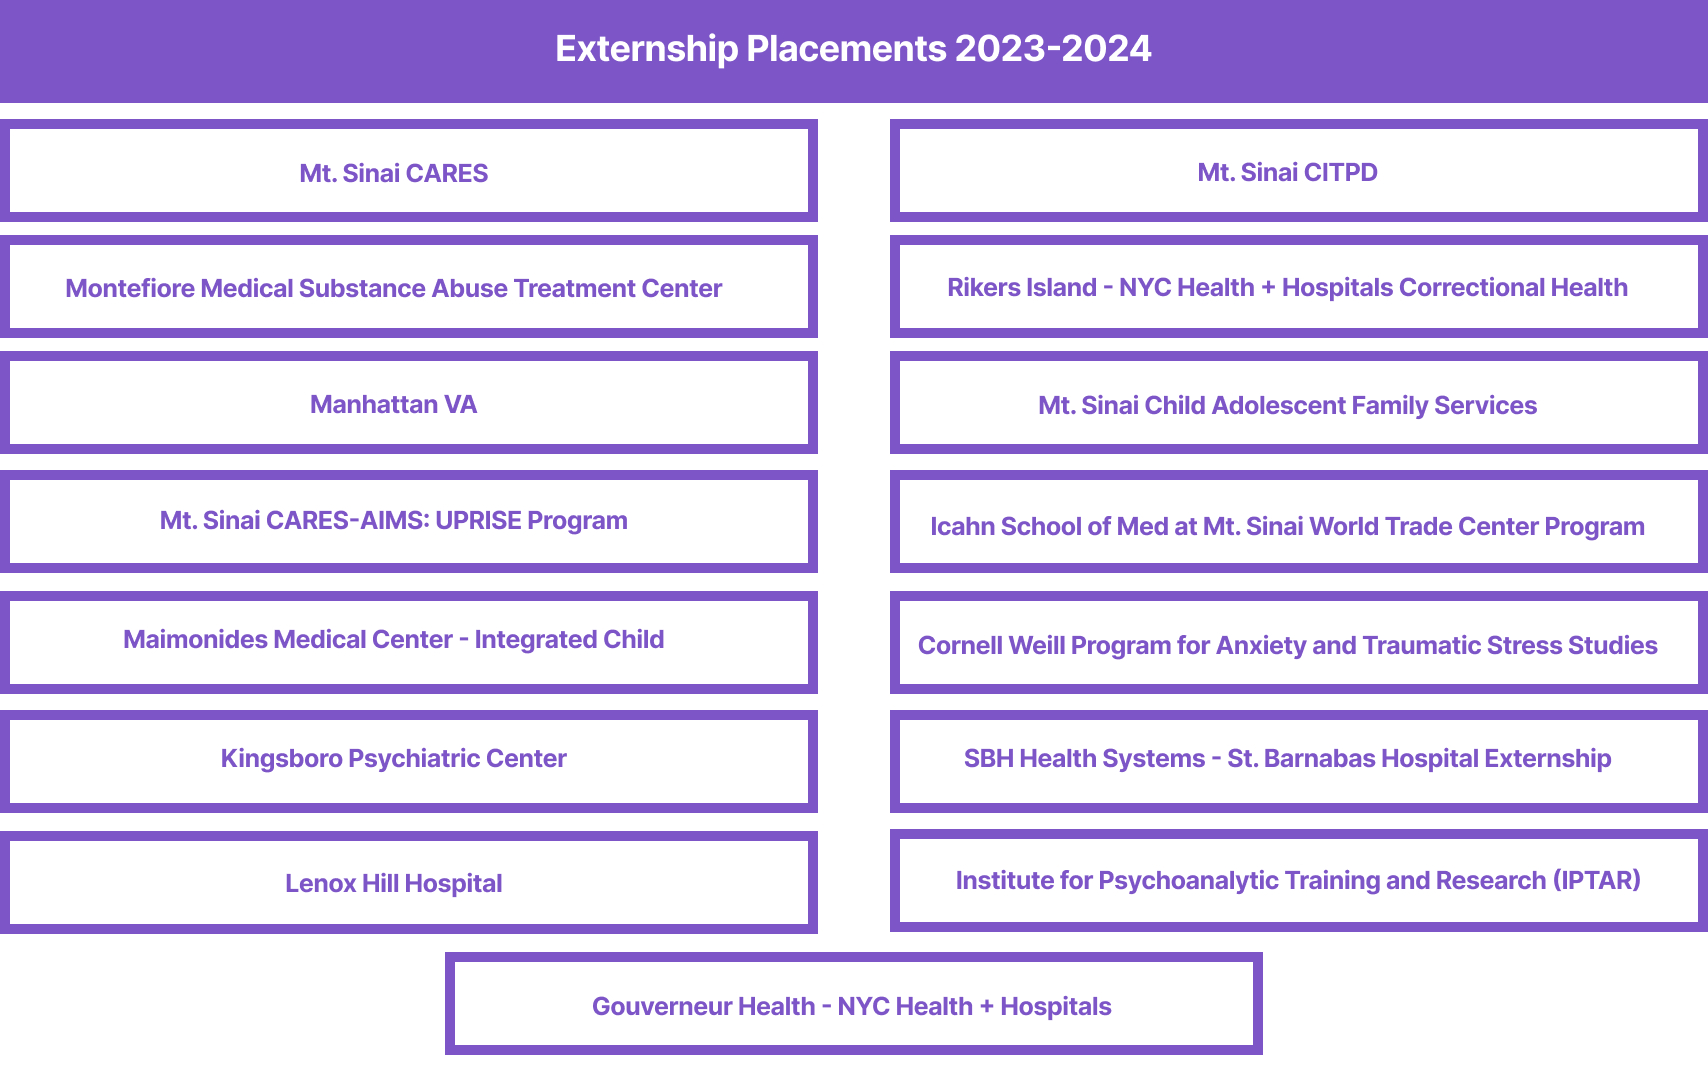 Externship Placements 2023-2024: Mt. Sinai CARES, Mt. Sinai CITPD, Montefiore Medical Substance Abuse Treatment Center, Manhattan VA, Rikers Island Correctional Health, Mt. Sinai Child Adolescent Family Services, Gouverneur Health - NYC Health + Hospitals, Mt. Sinai CARES-AIMS: UPRISE Program, Icahn School of Med at Mt. Sinai World Trade Center Program, Maimonides Medical Center - Integrated Child, Cornell Weill Program for Anxiety and Traumatic Stress Studies, Kingsboro Psychiatric Center, SBH H